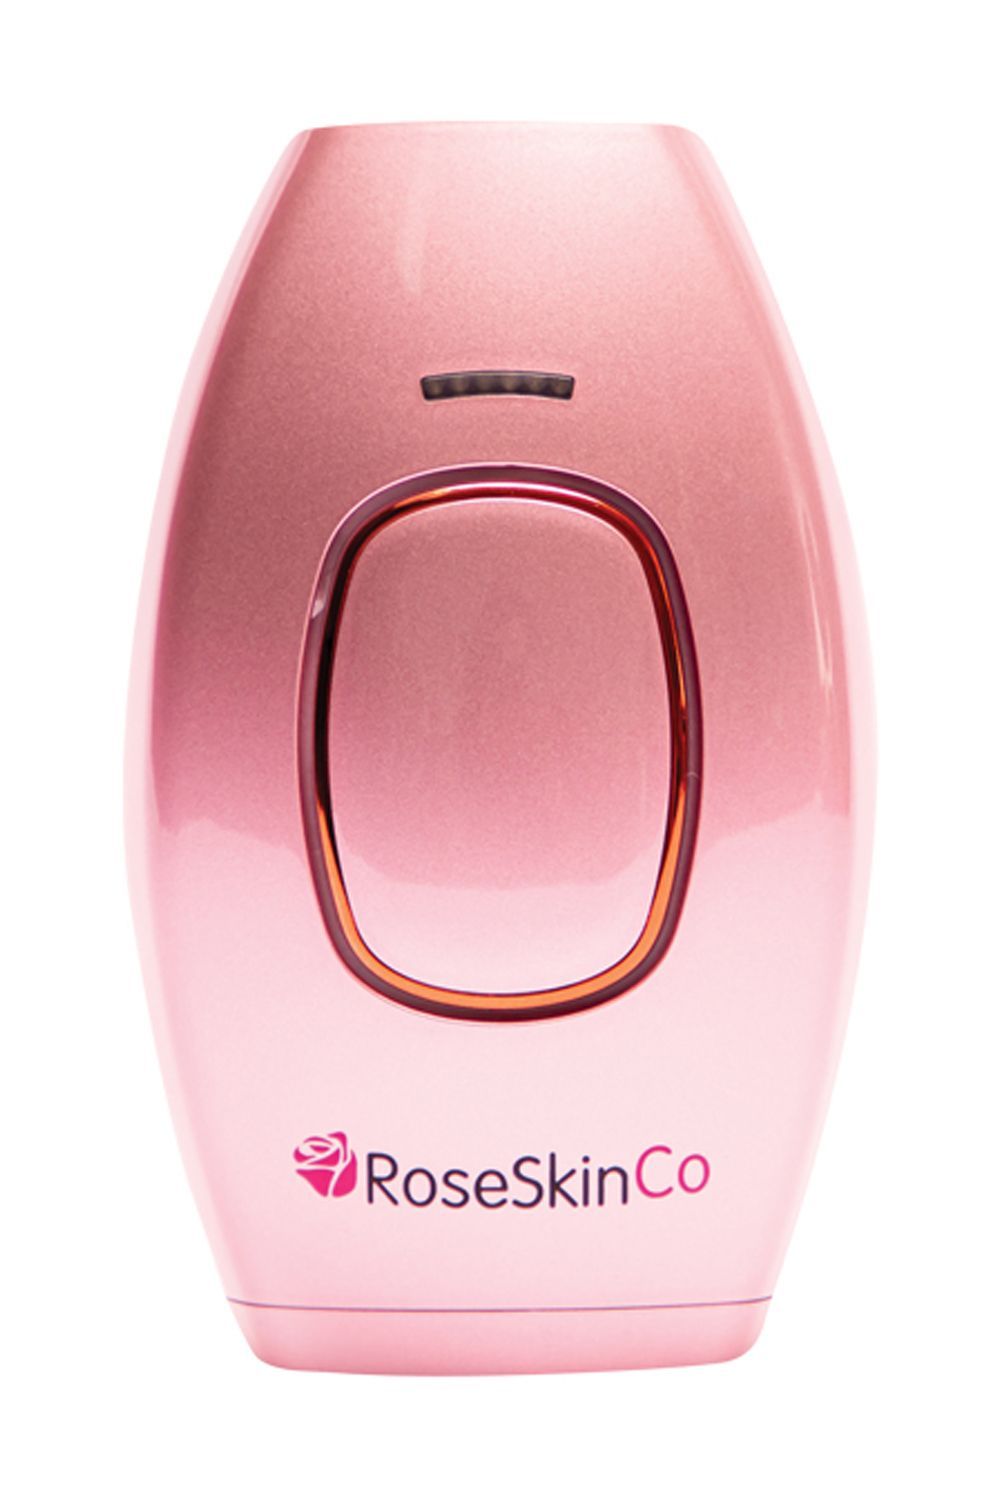 20 Best At Home Laser Hair Removal Devices of 2023